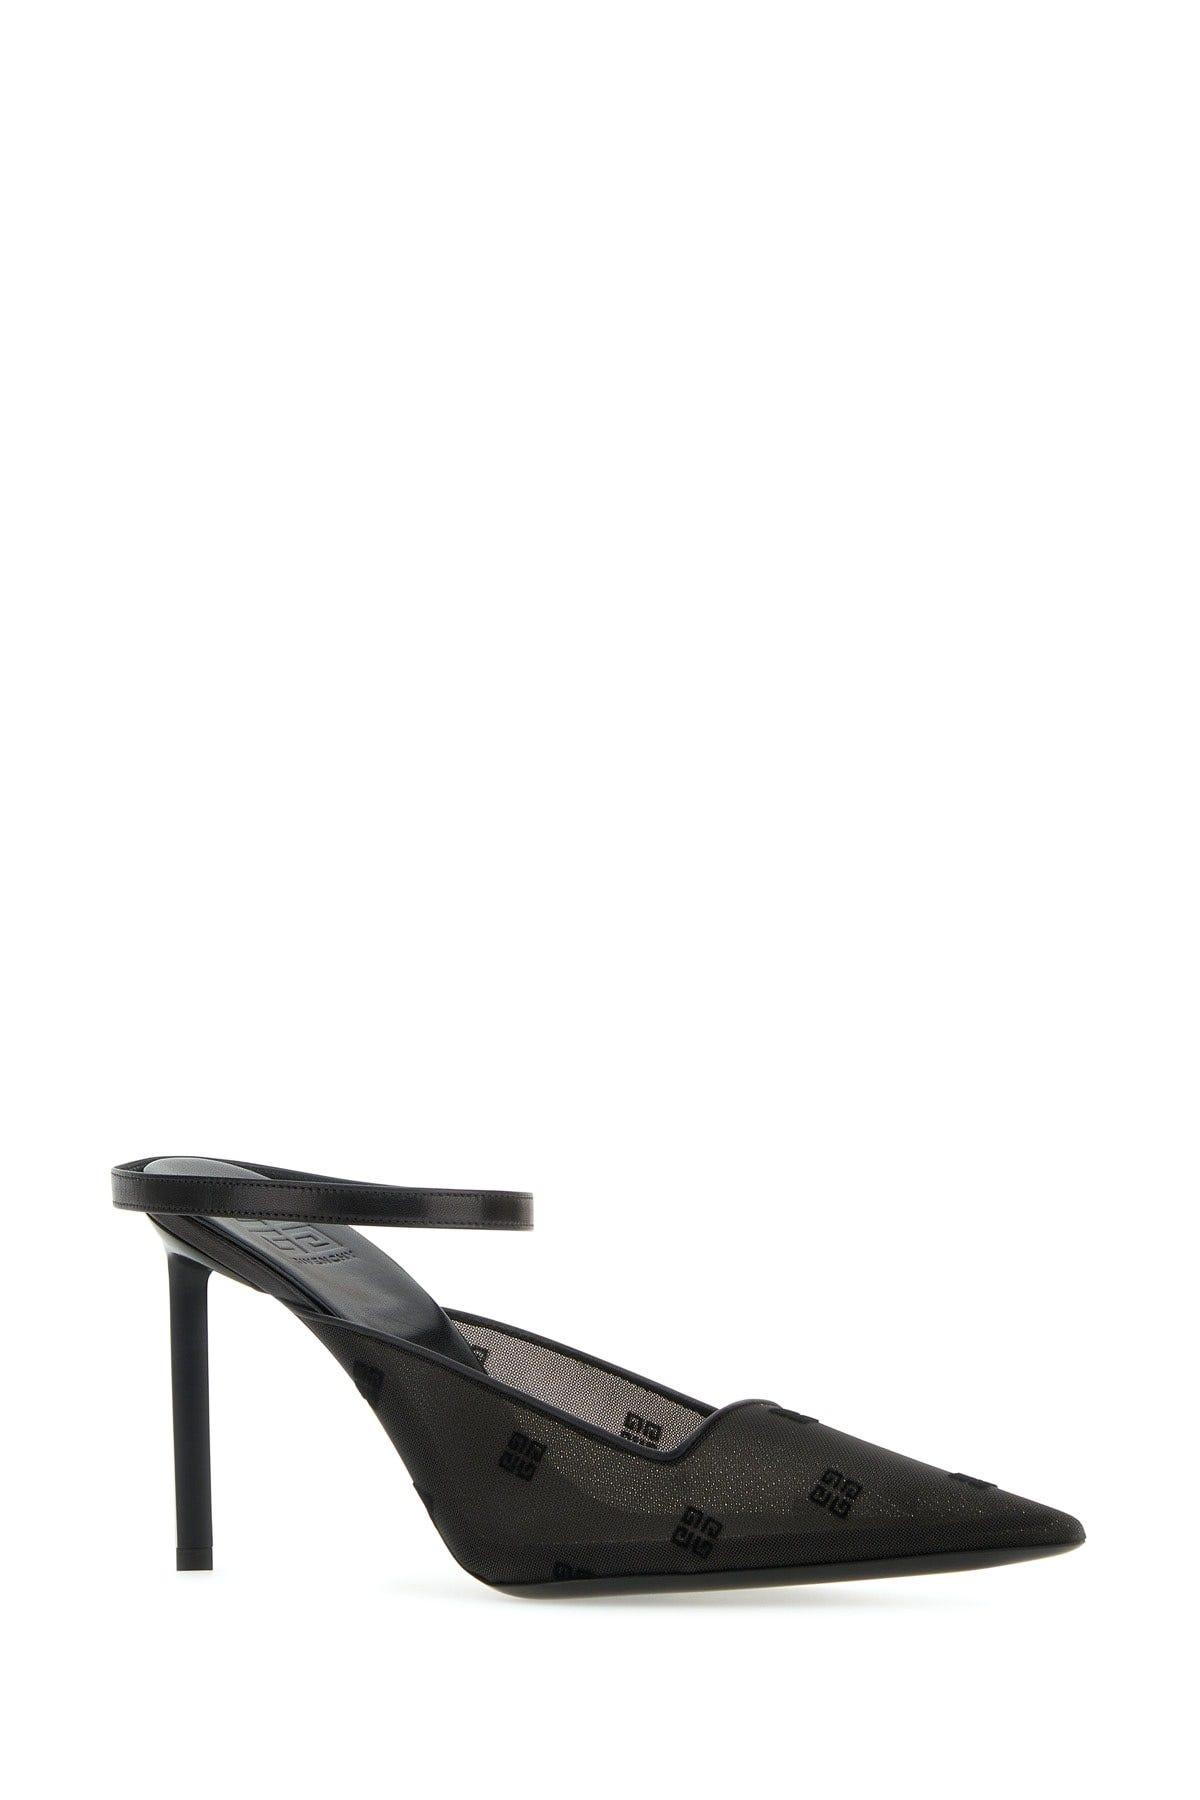 Givenchy Heeled Shoes in Black | Lyst